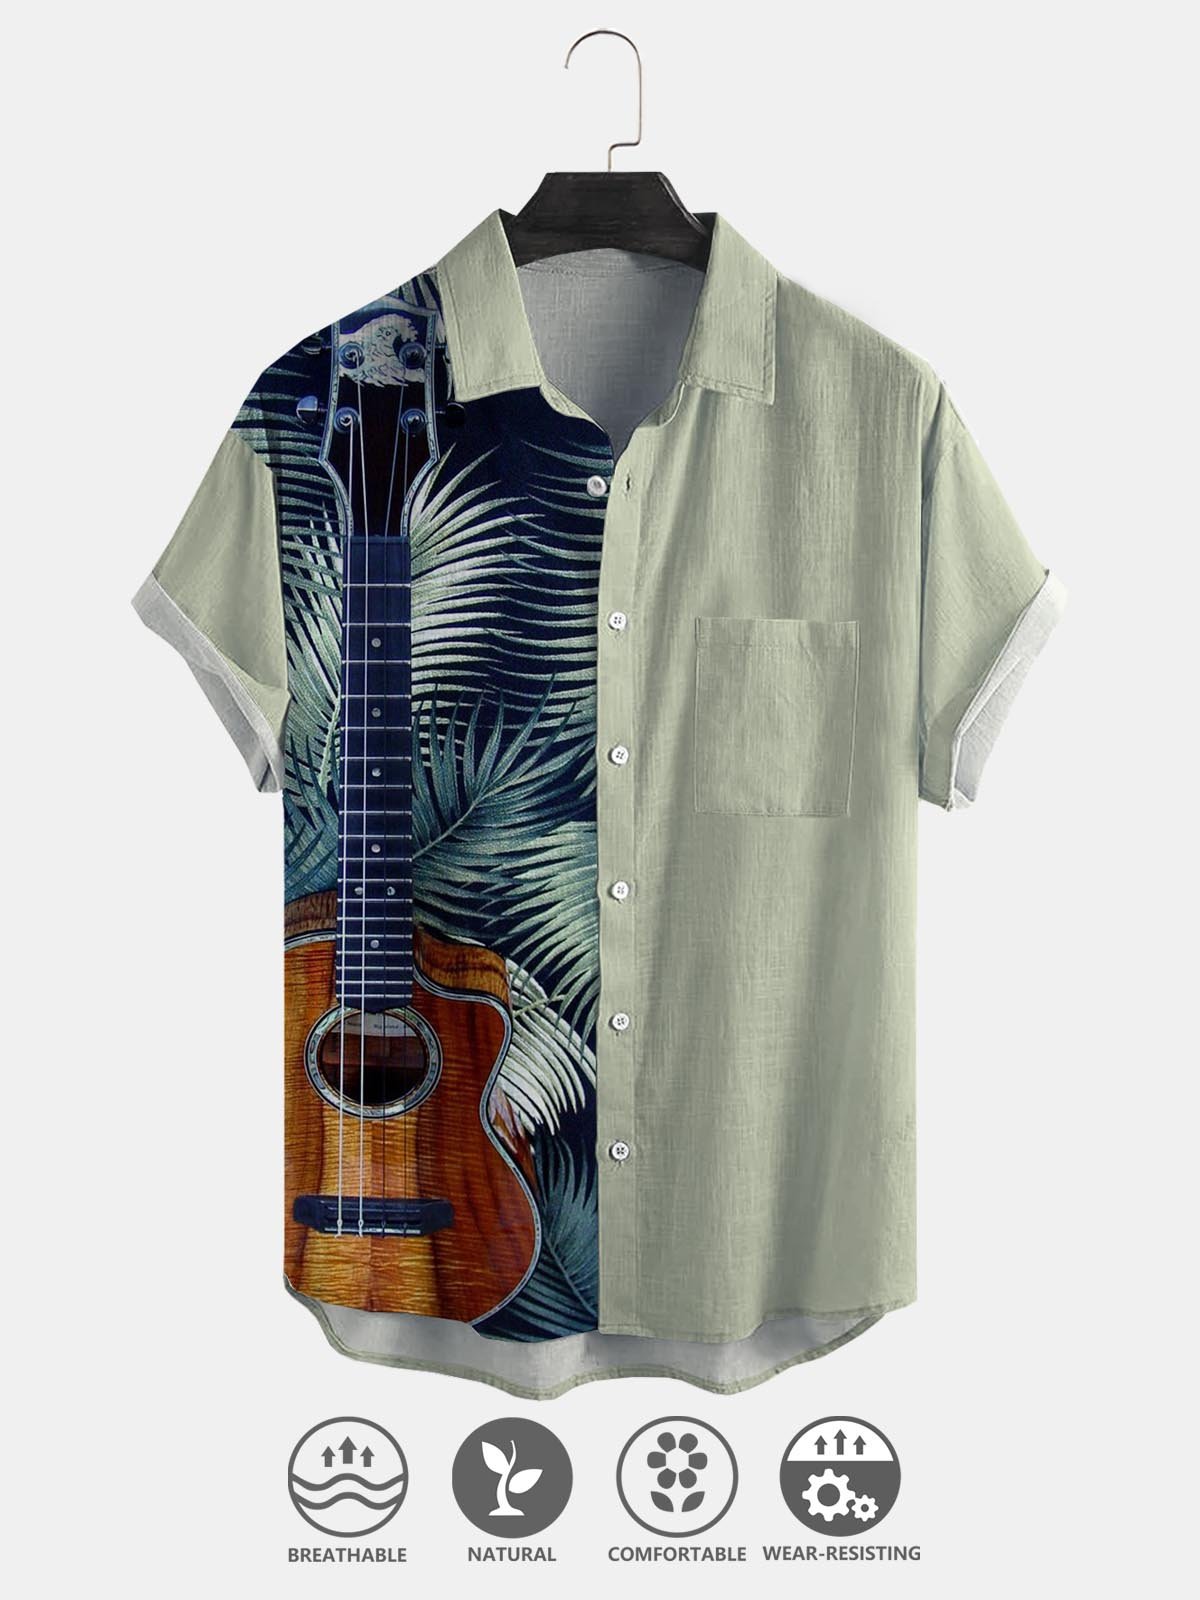 Cotton And Linen Holiday Leisure Short-sleeved Shirt